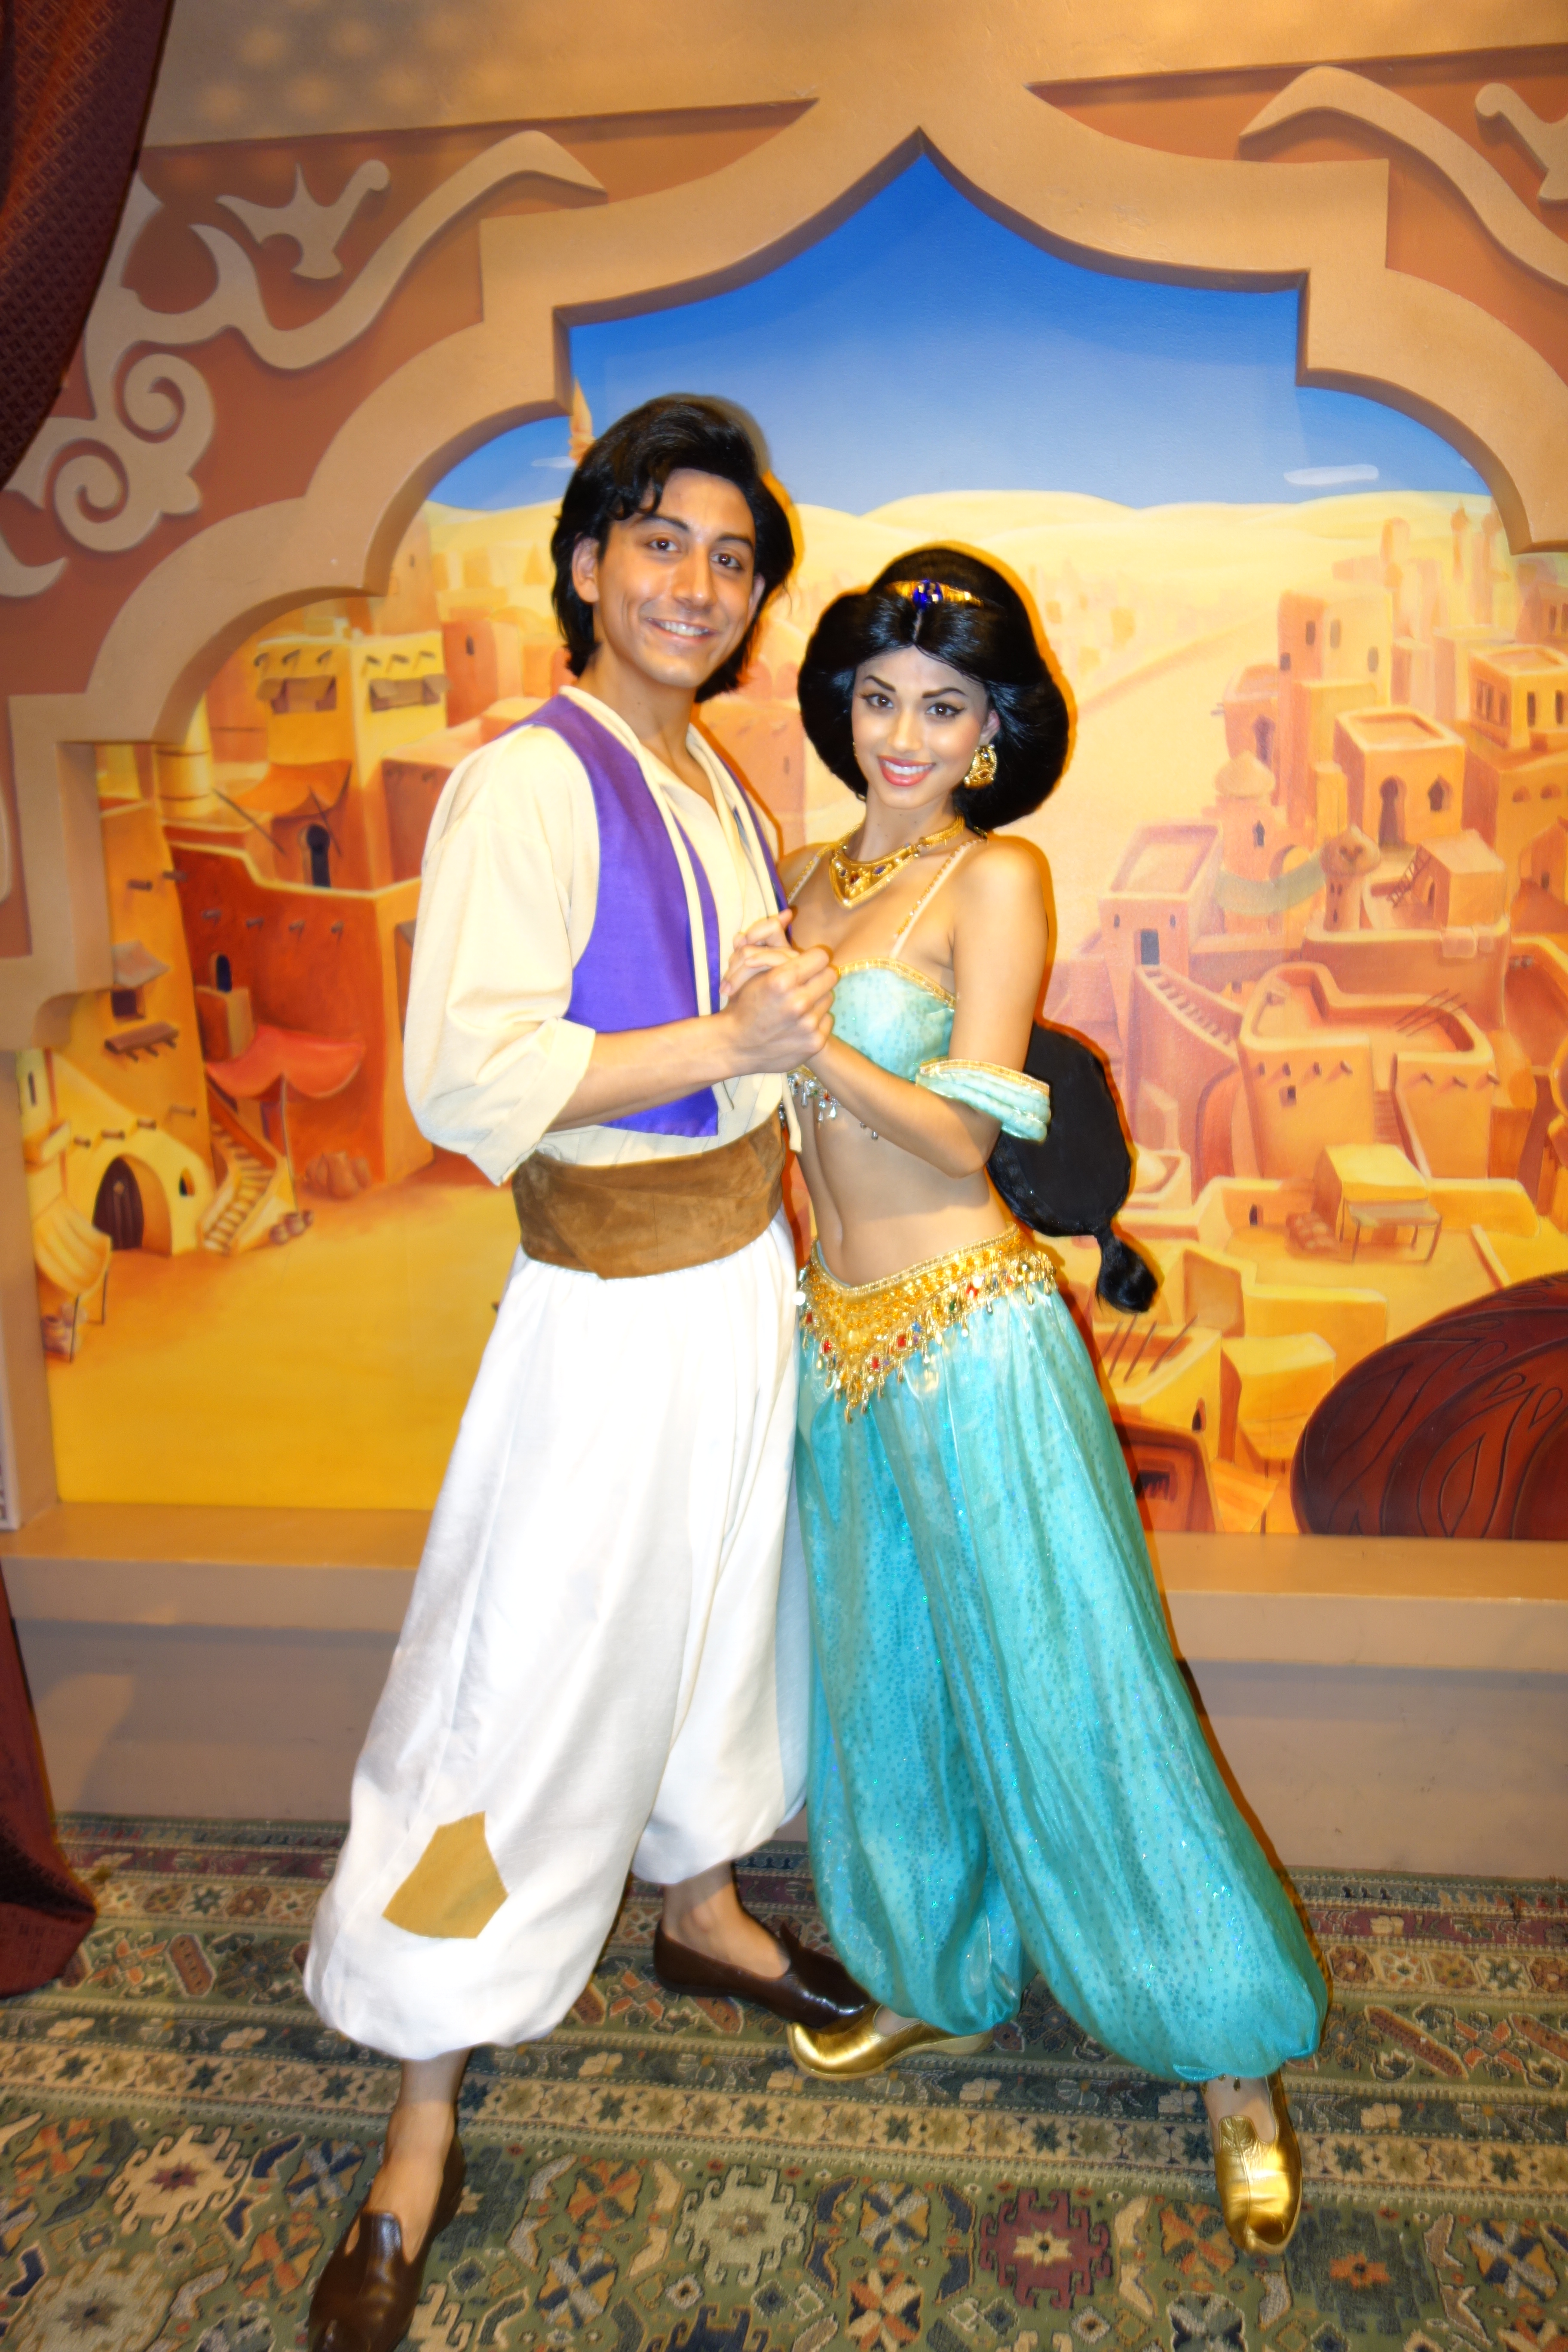 Aladdin and Jasmine Disney World Character meet and greet in Epcot